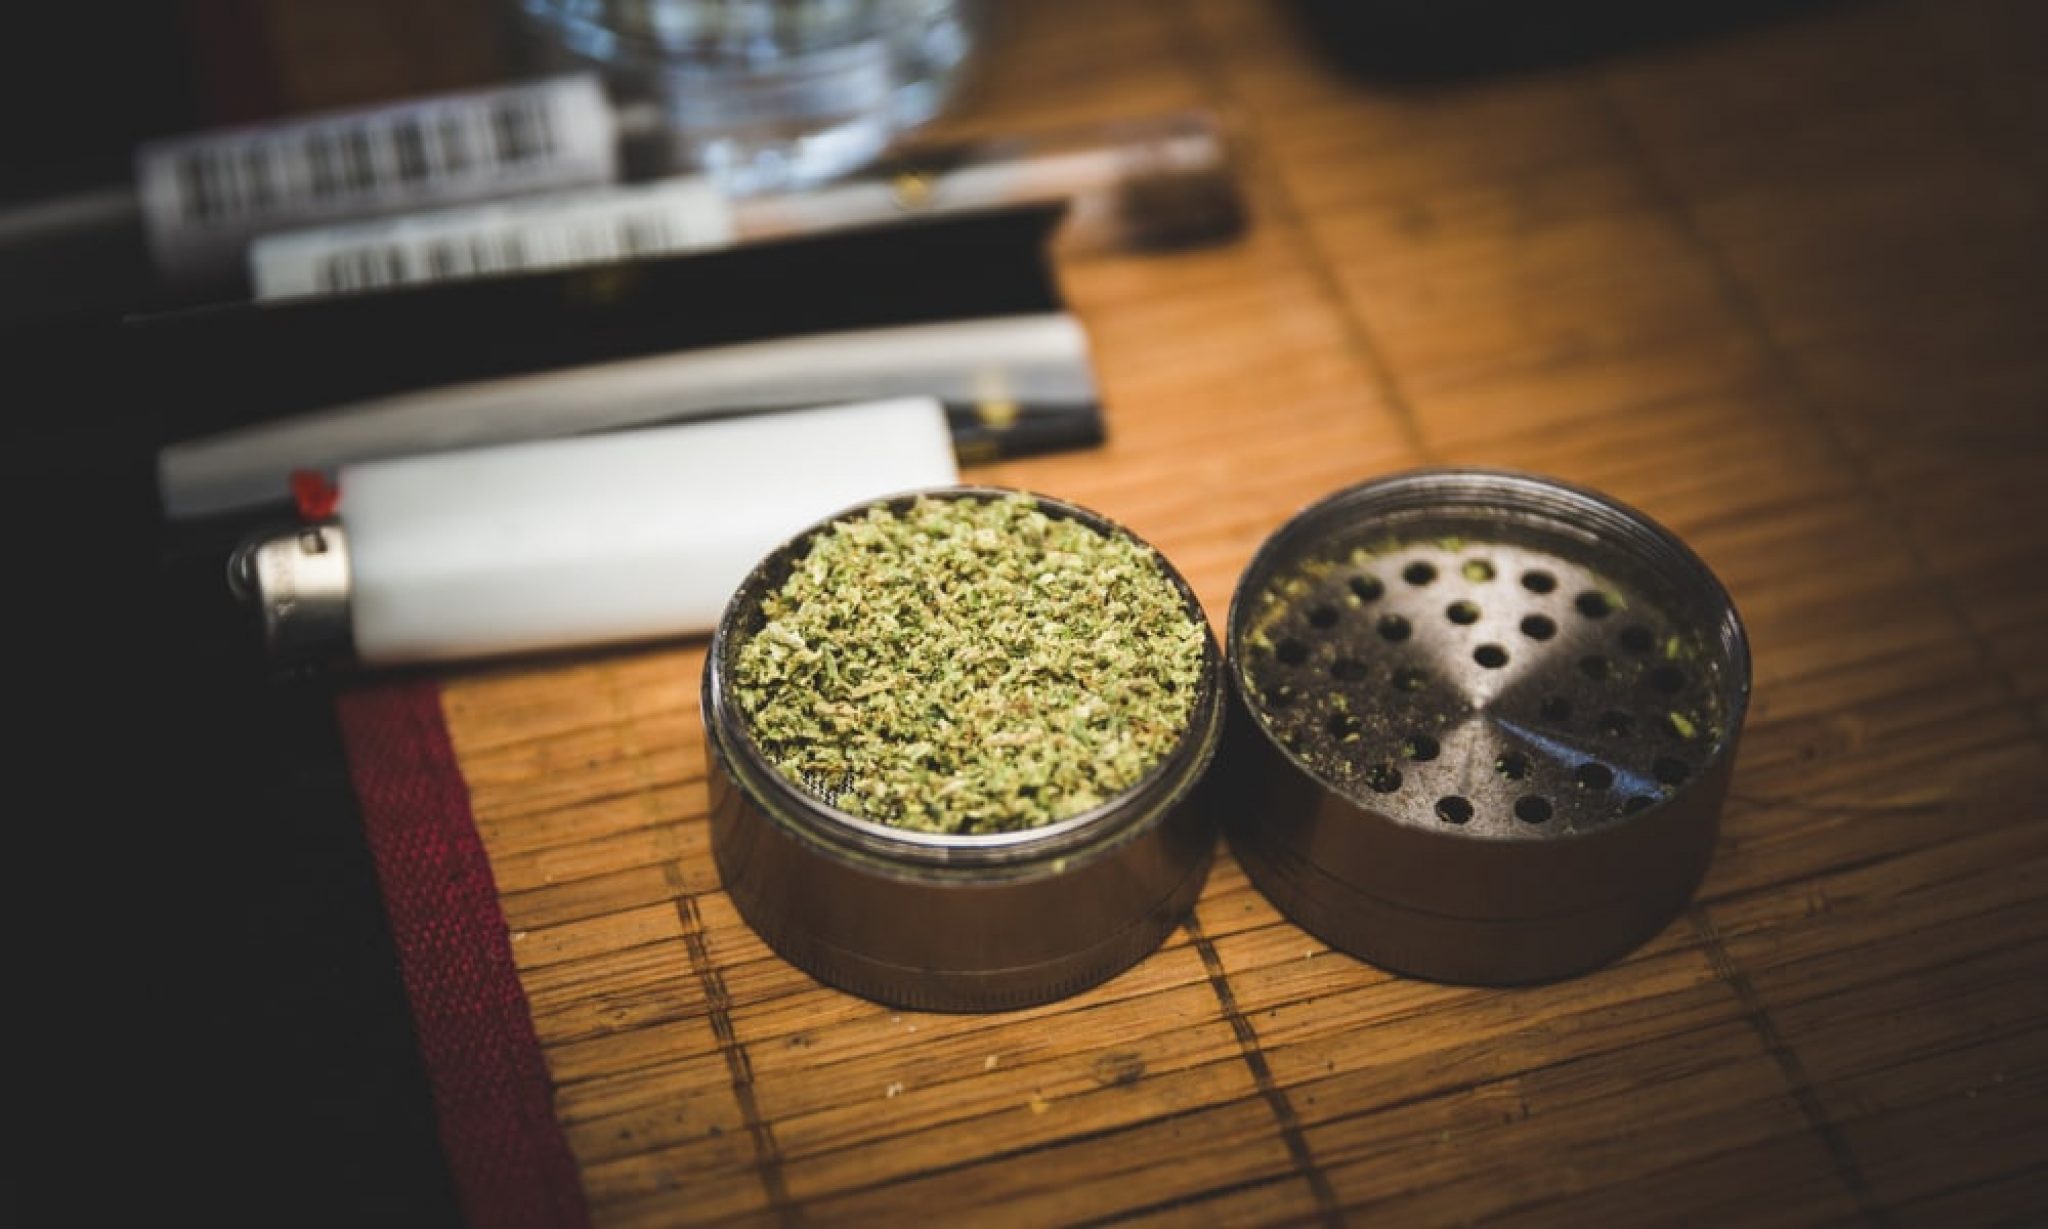 Top 6 Best Weed Grinder for Making the ‘Dopest’ Smoke (Reviews 2022)